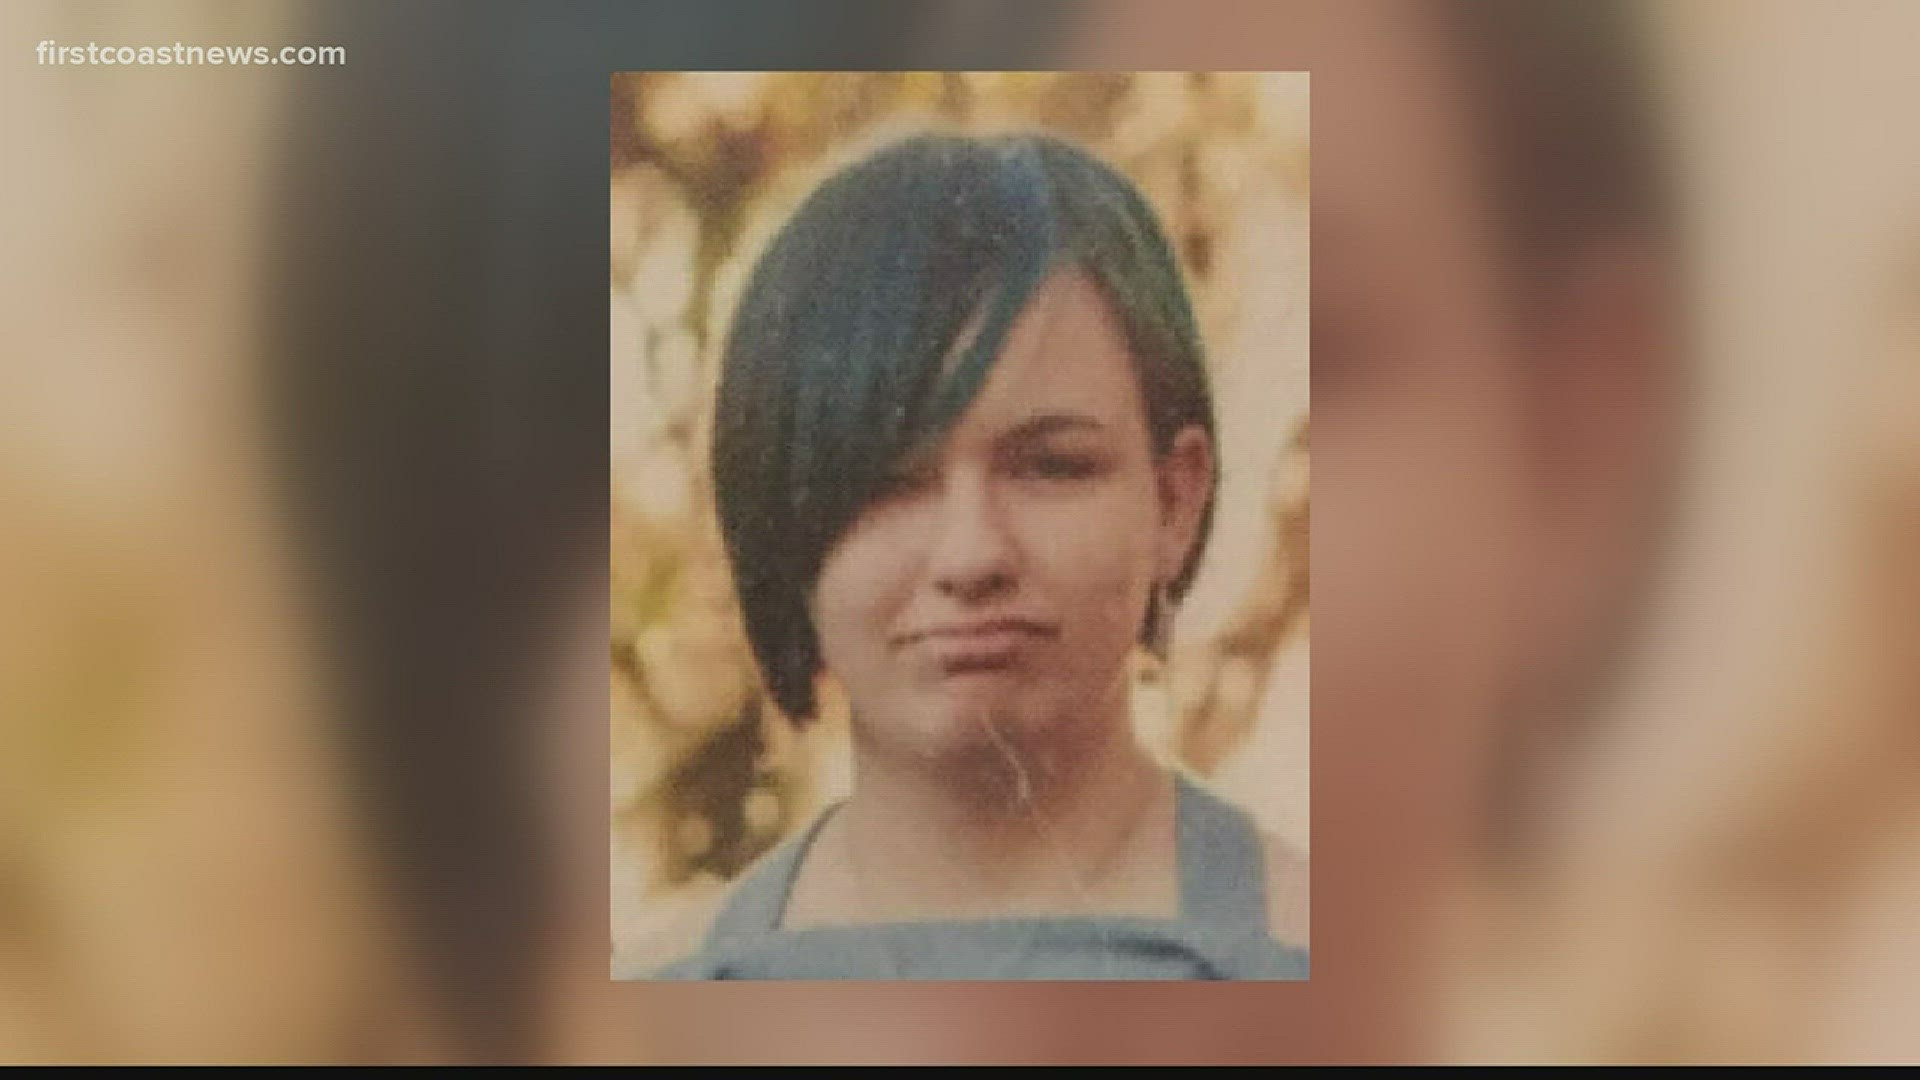 An 11-year-old girl from Orlando was safely found in Macon after a brief disappearance.